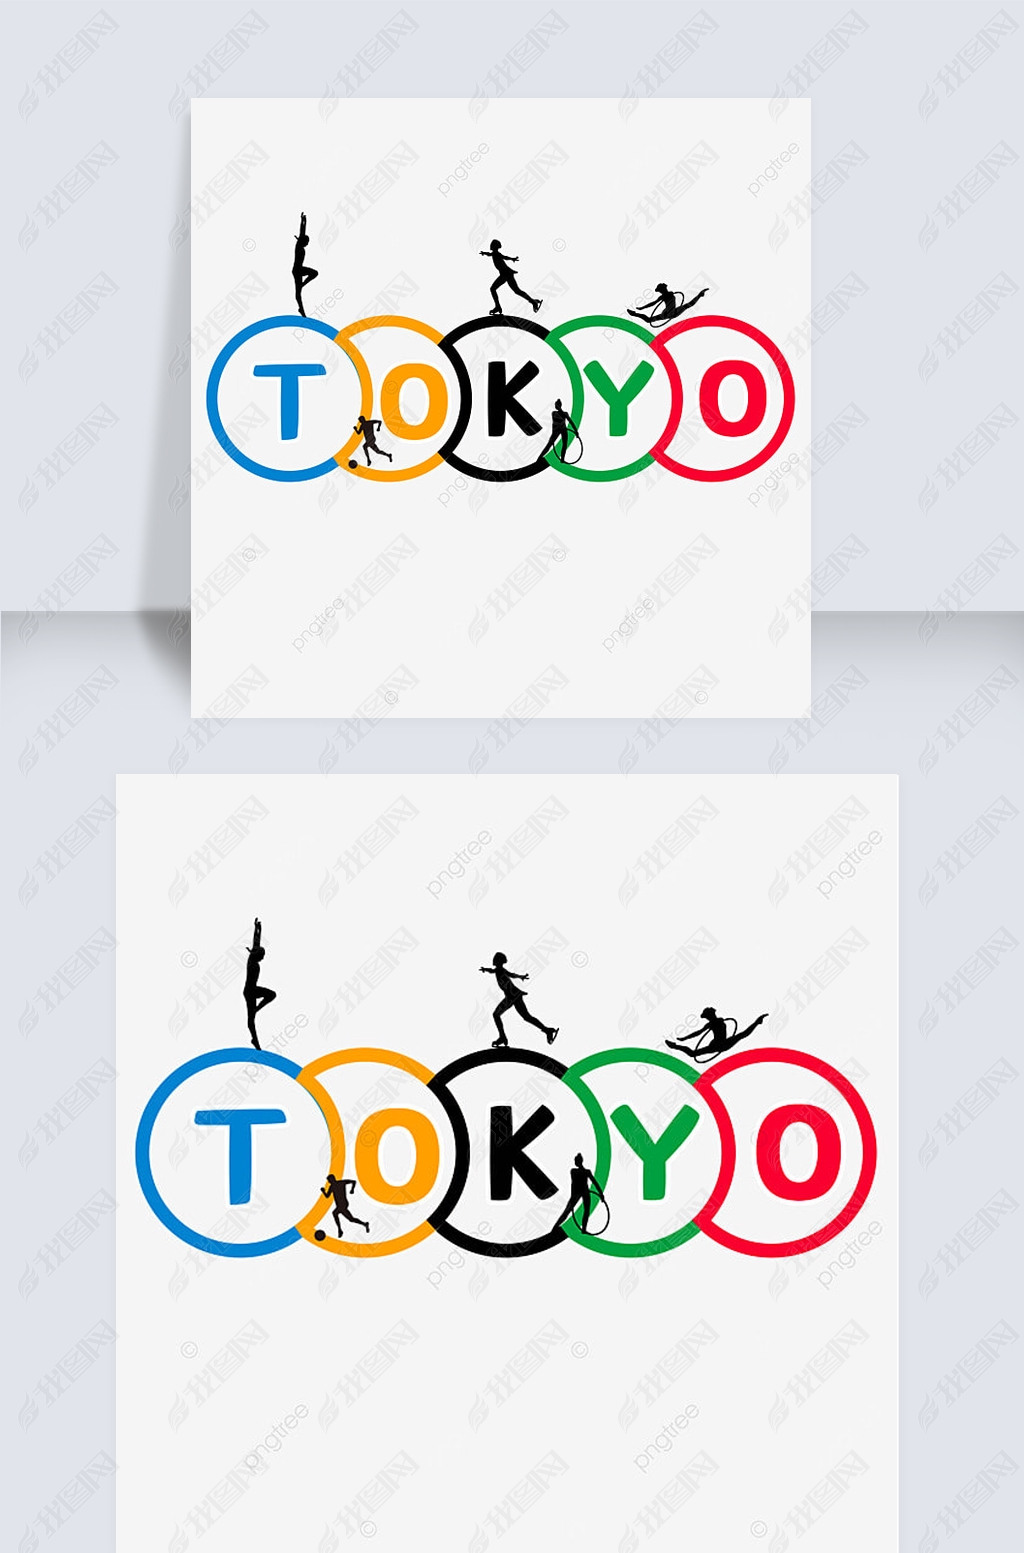 tokyo olympics 2020 silhouettes